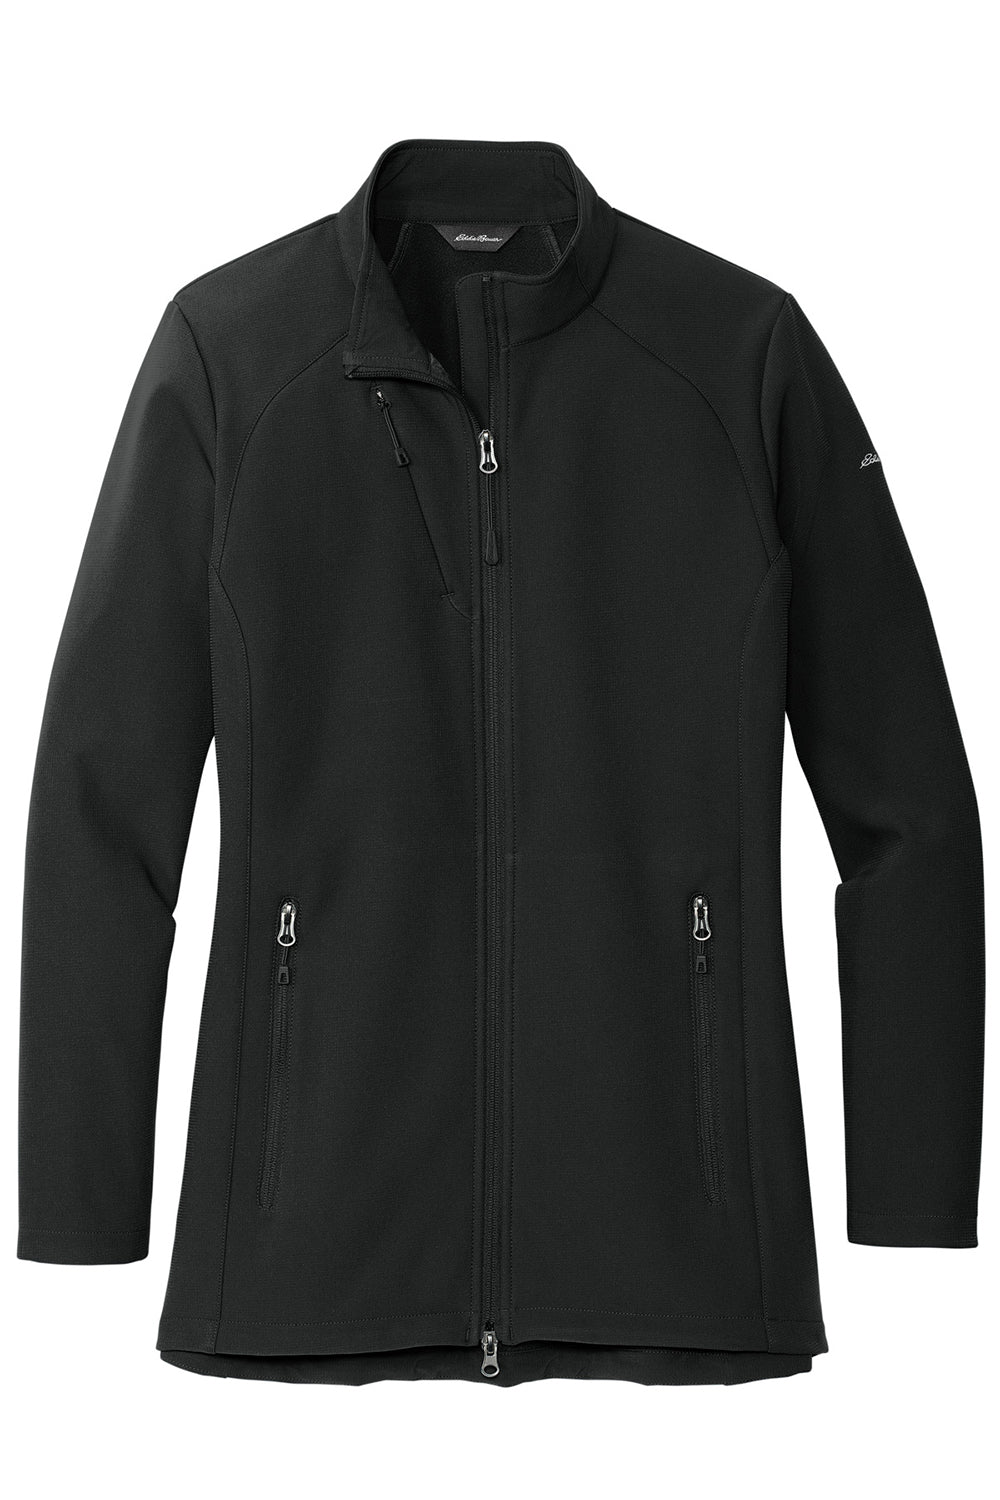 Eddie Bauer EB545 Womens Stretch Water Resistant Full Zip Soft Shell Jacket Deep Black Flat Front